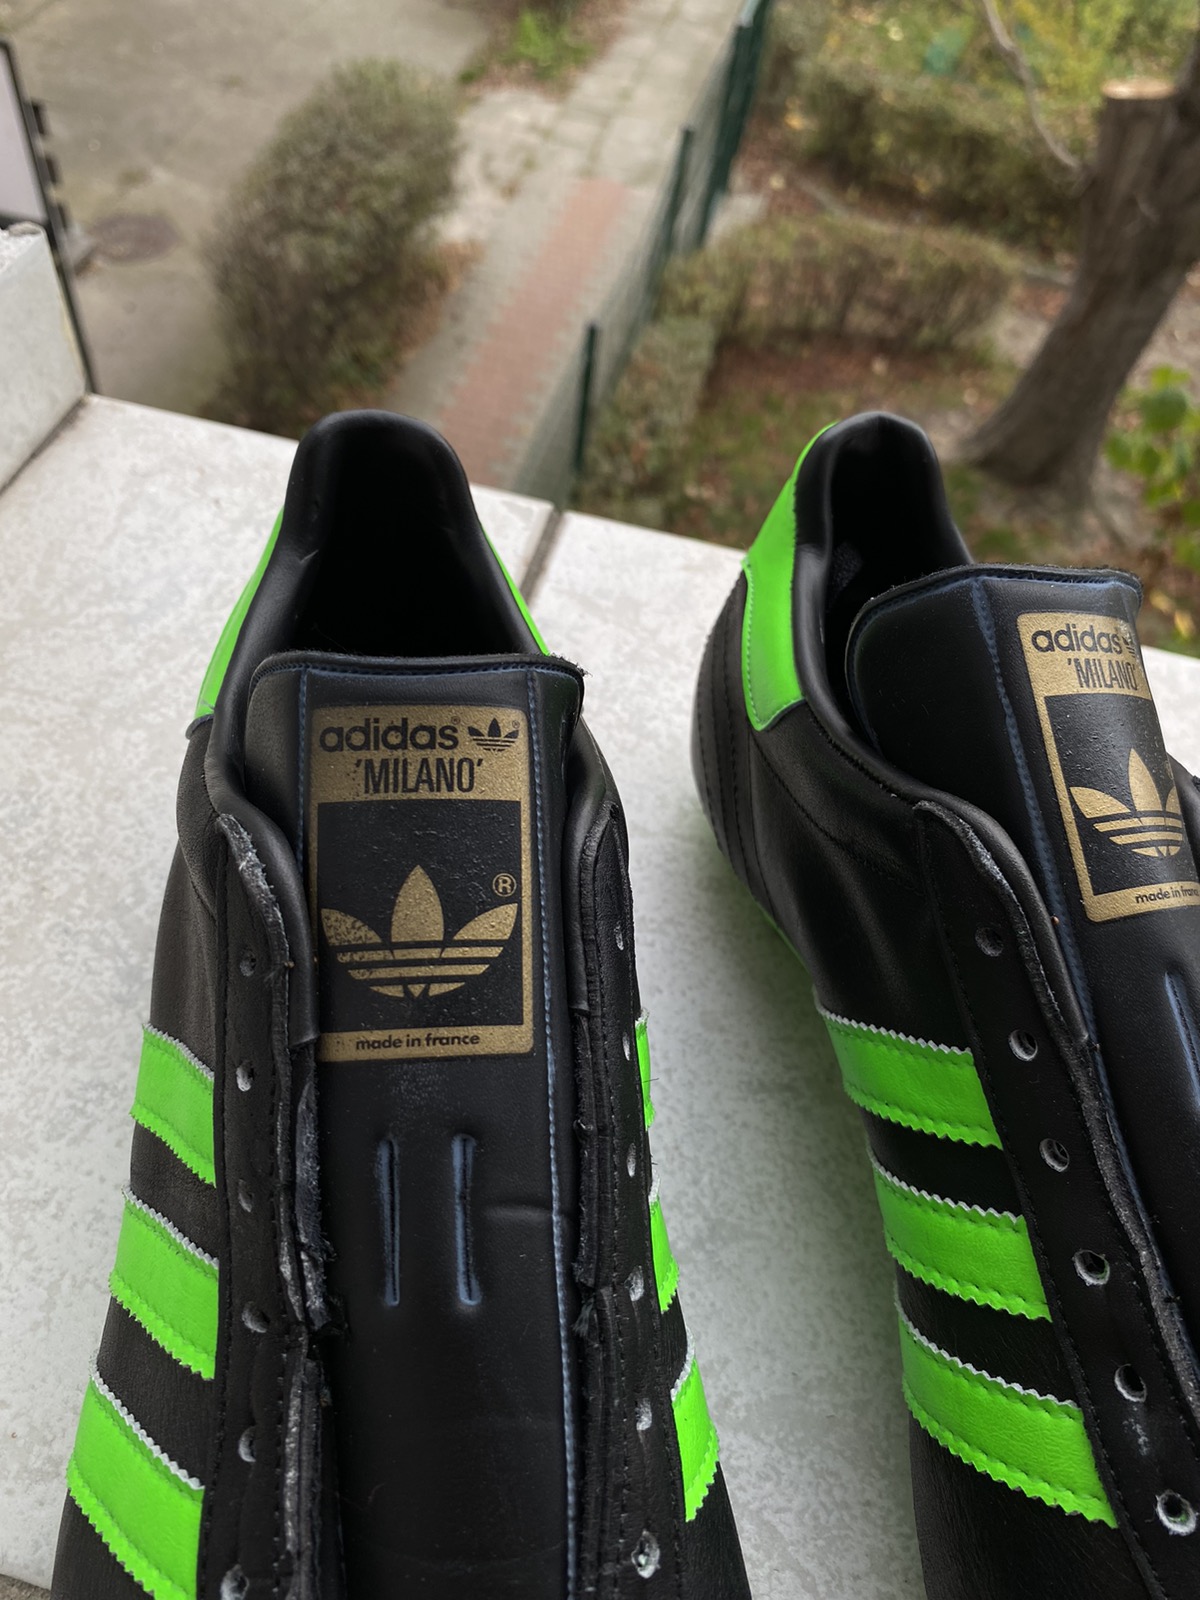 Adidas Milano made in France football boots 70-80s - 4